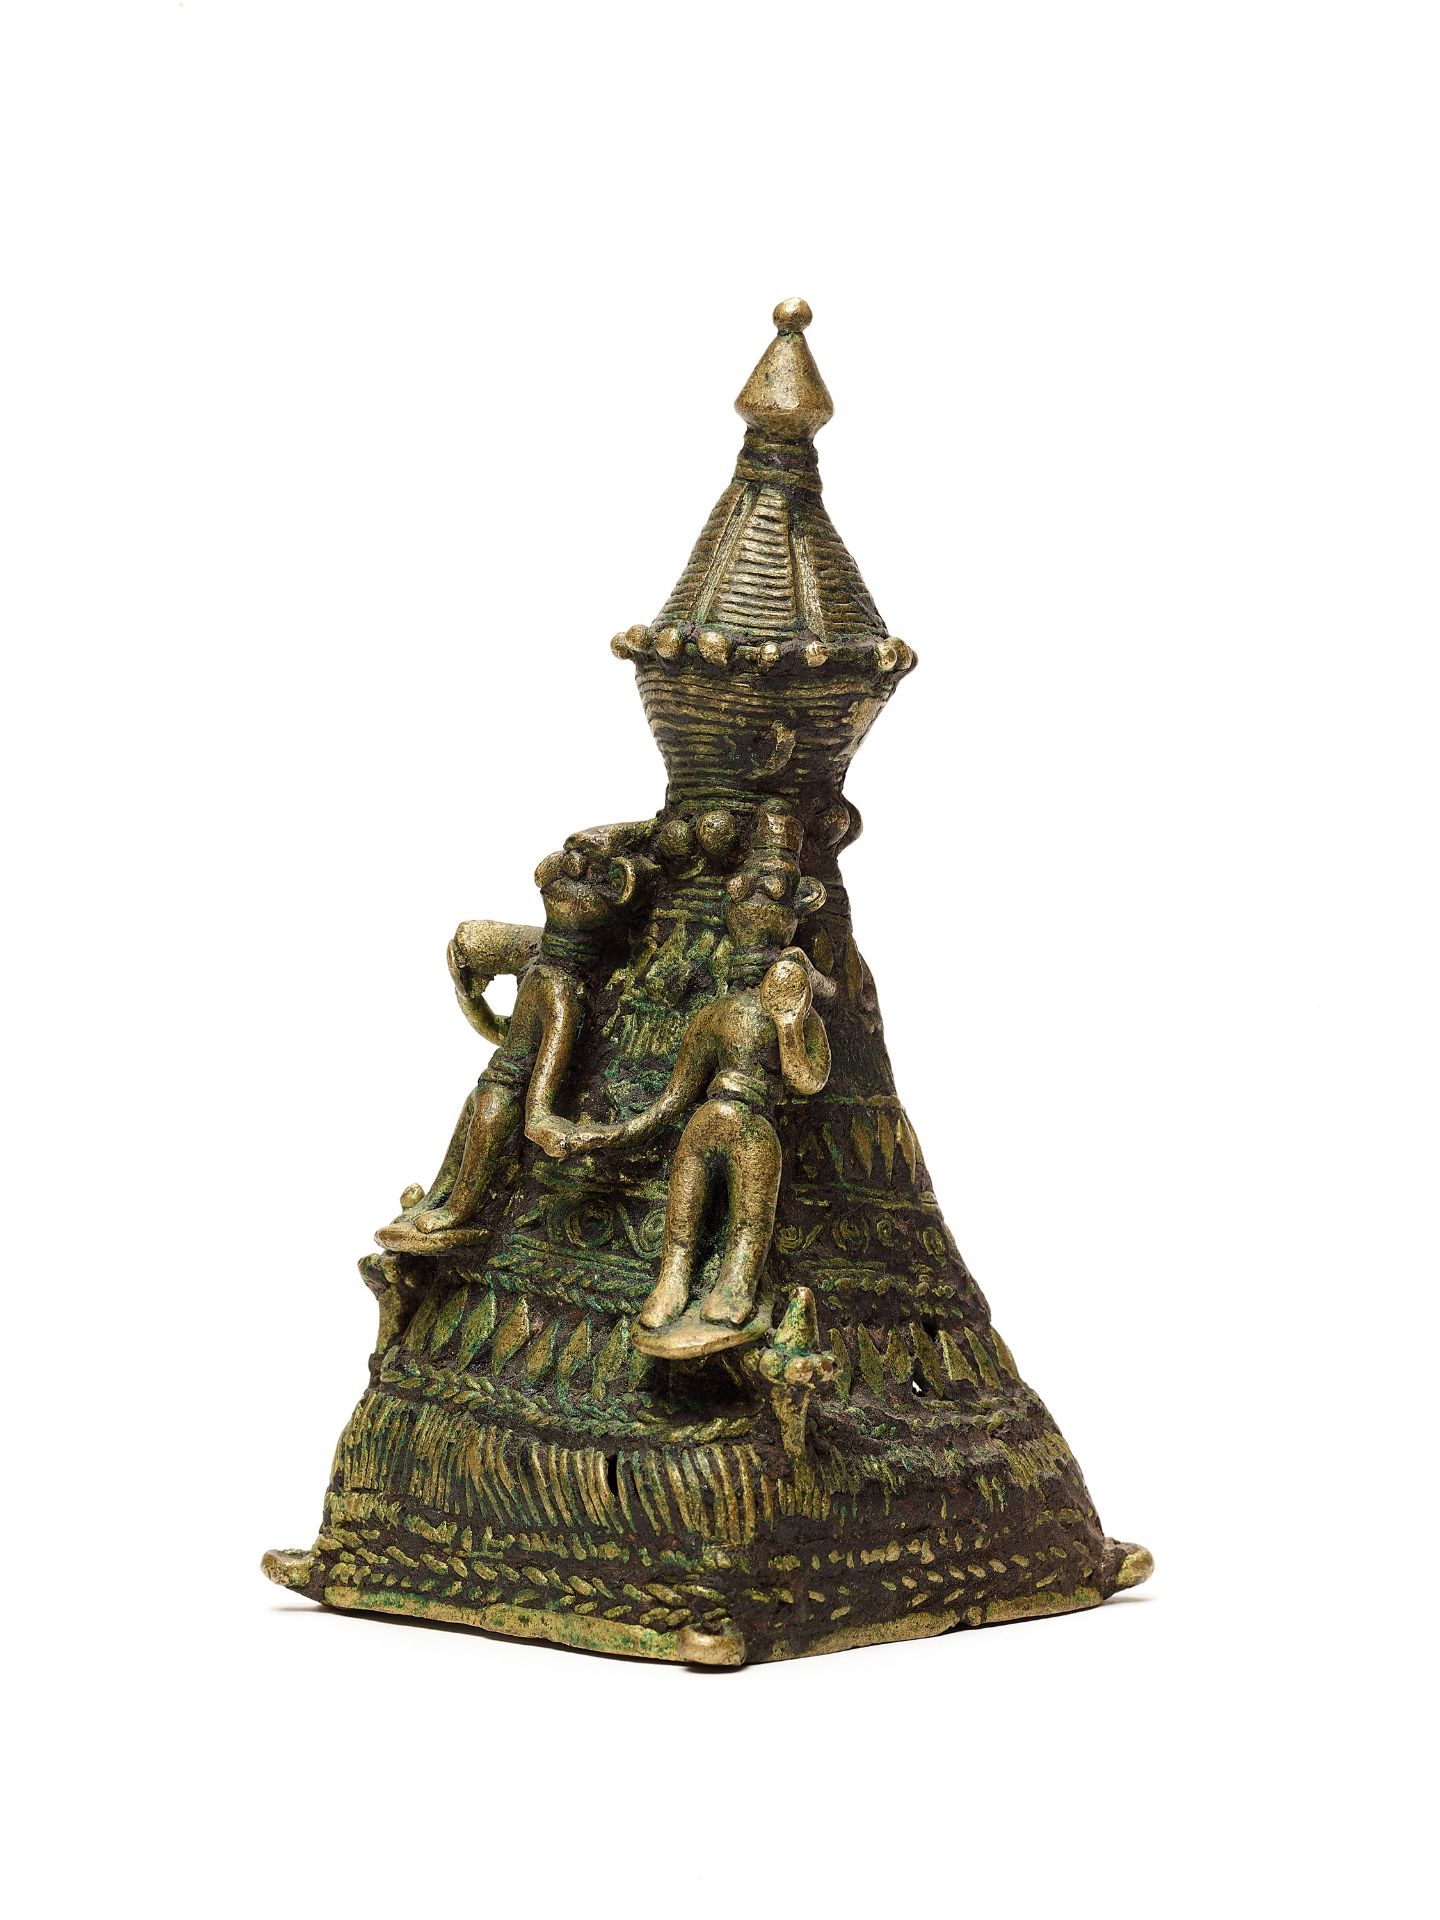 A BASTAR BRONZE OF PYRAMID WITH FIGURES - Image 2 of 4